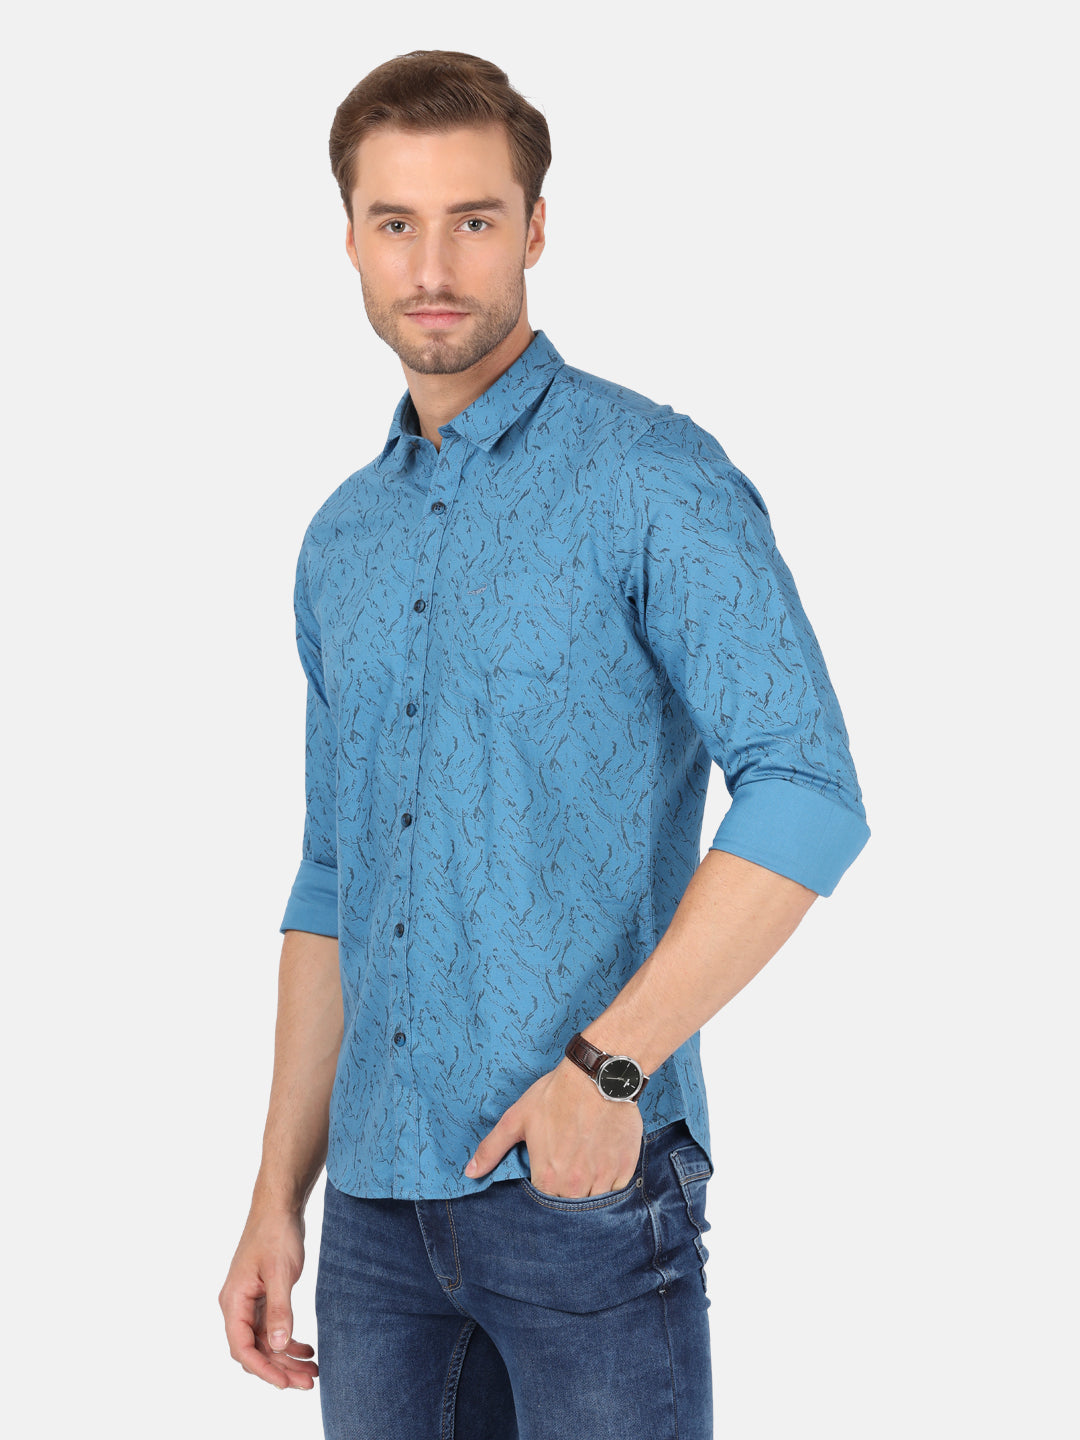 Crocodile Casual Full Sleeve Slim Fit Printed River Blue with Collar Shirt for Men